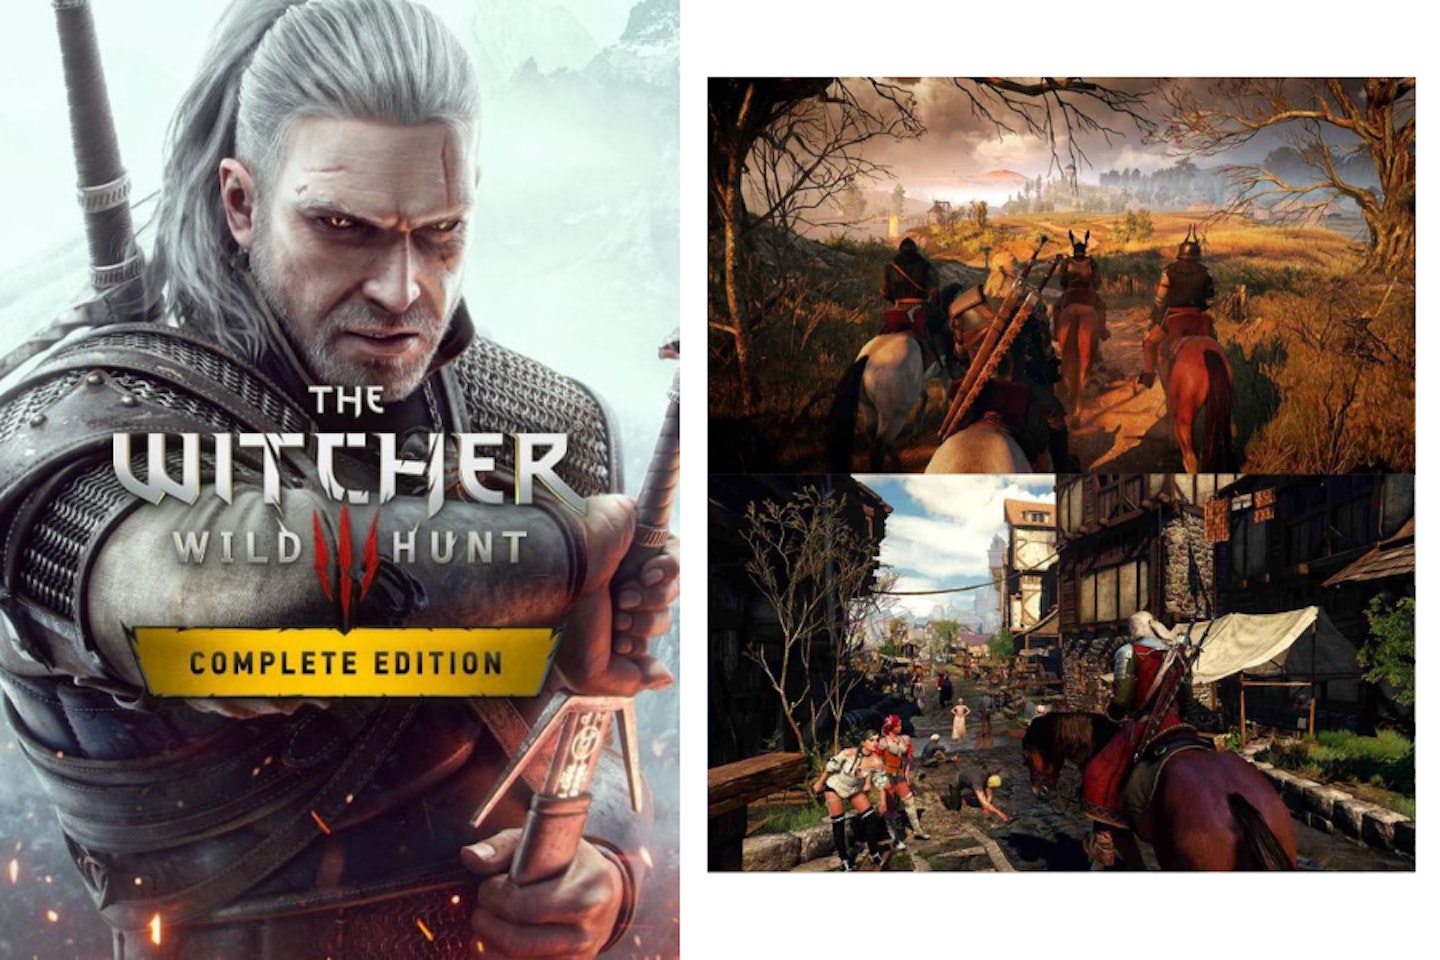 The Witcher 3: Wild Hunt- one of the best PC games